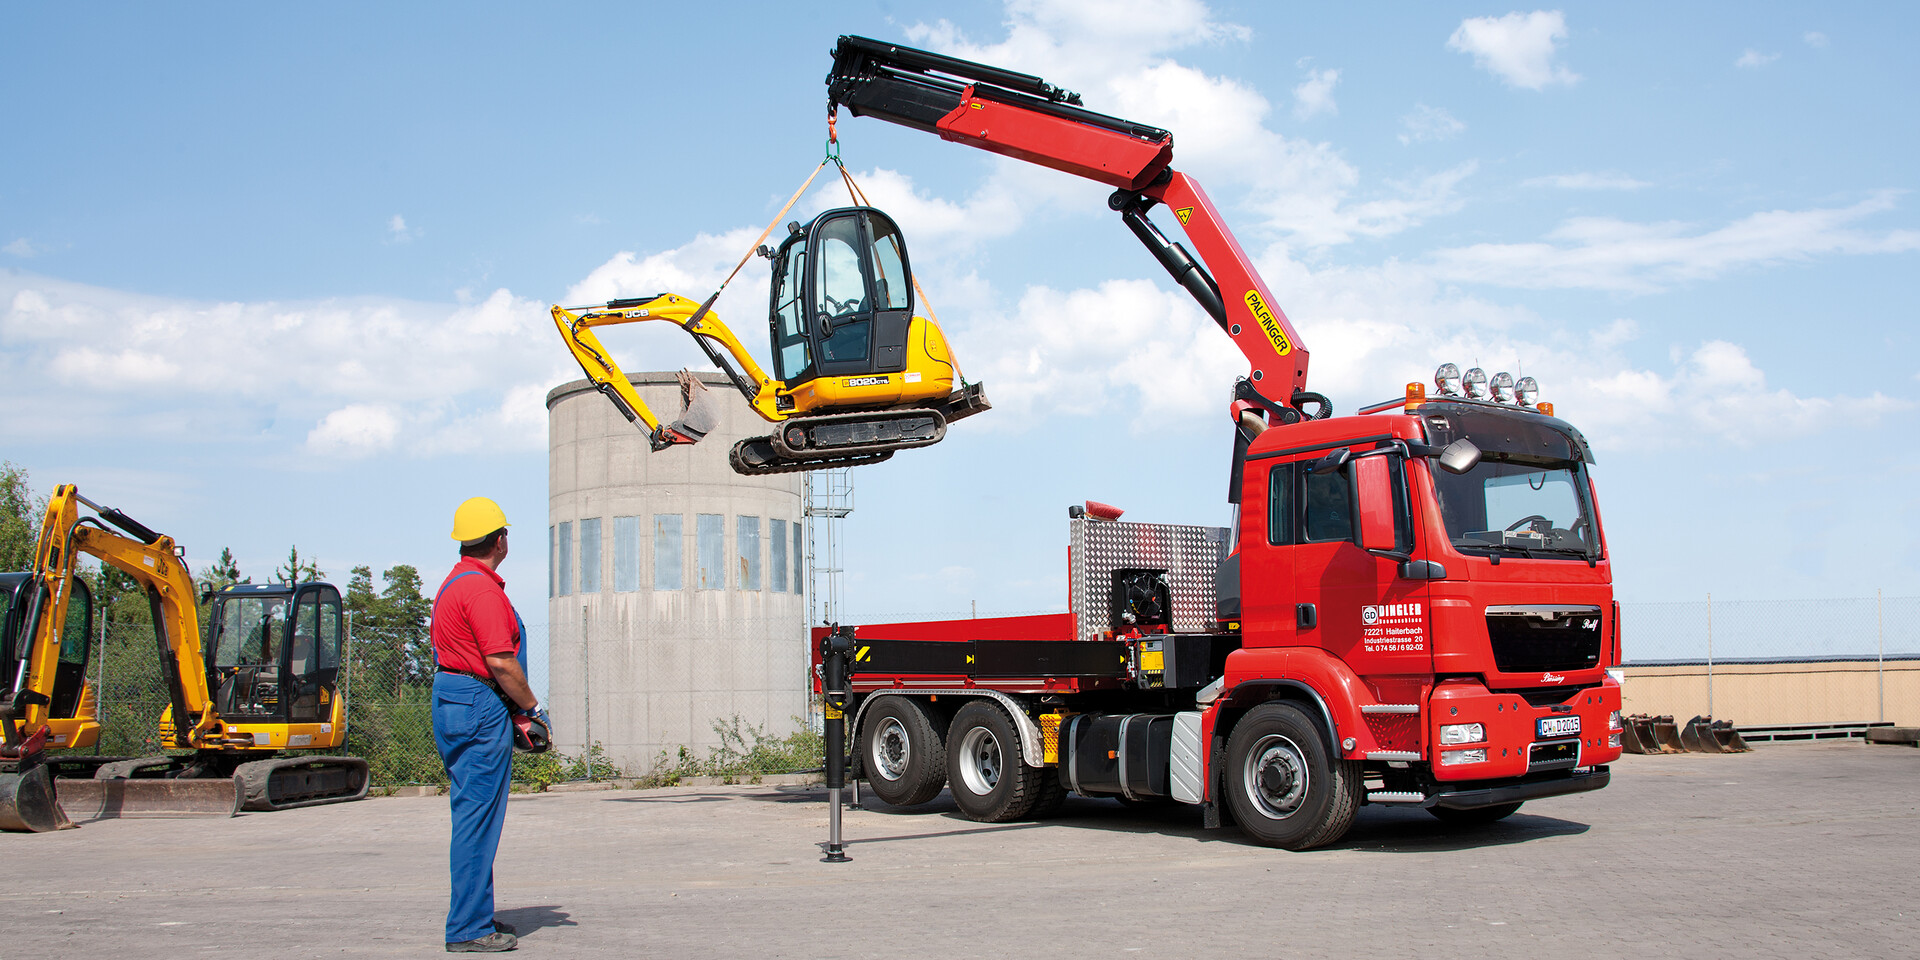 Rent lorry cranes in Singapore here.
